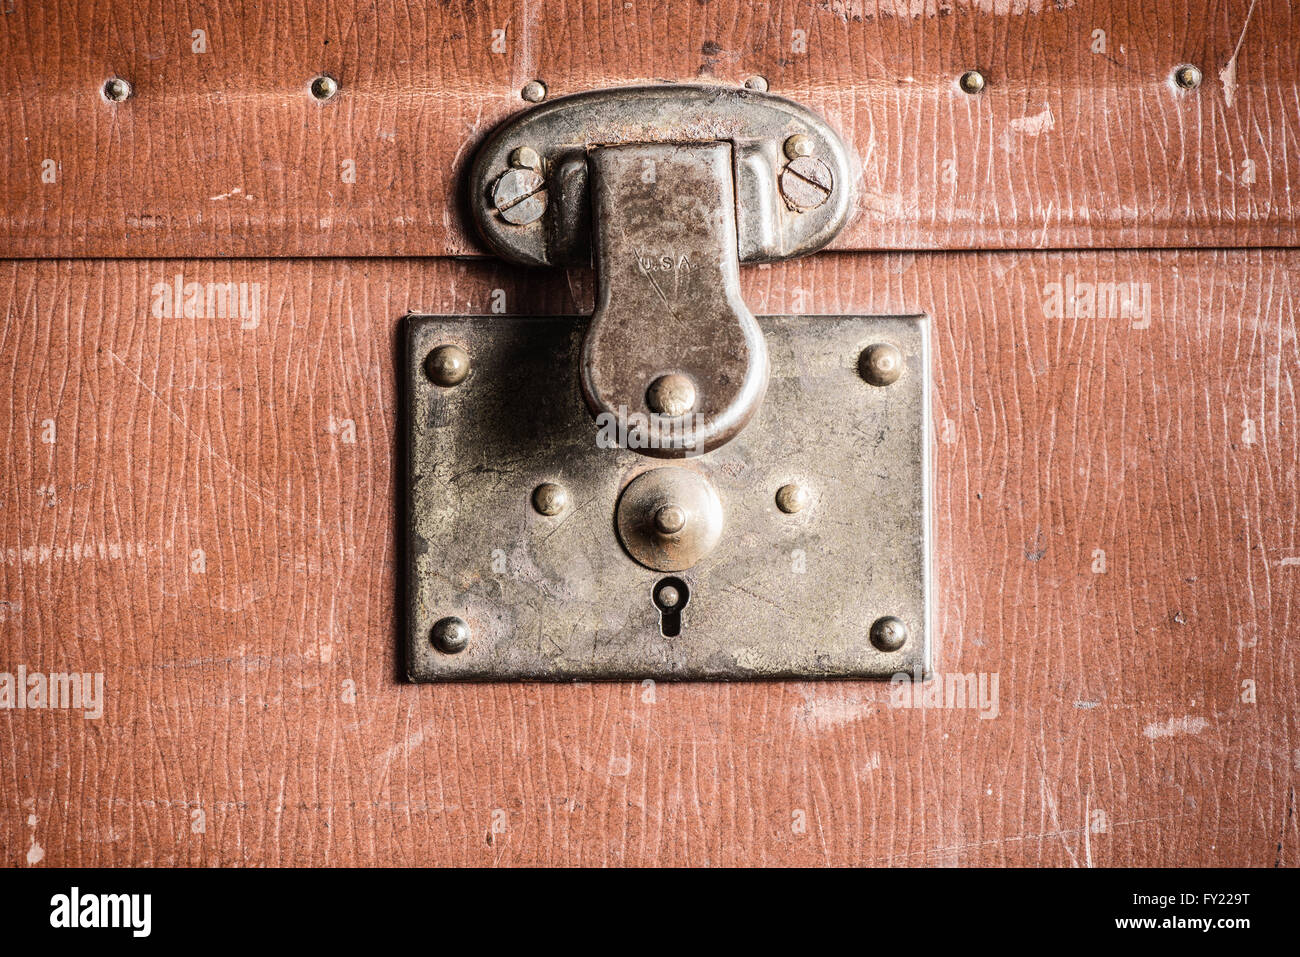 Lock of an old brown leather bag Stock Photo